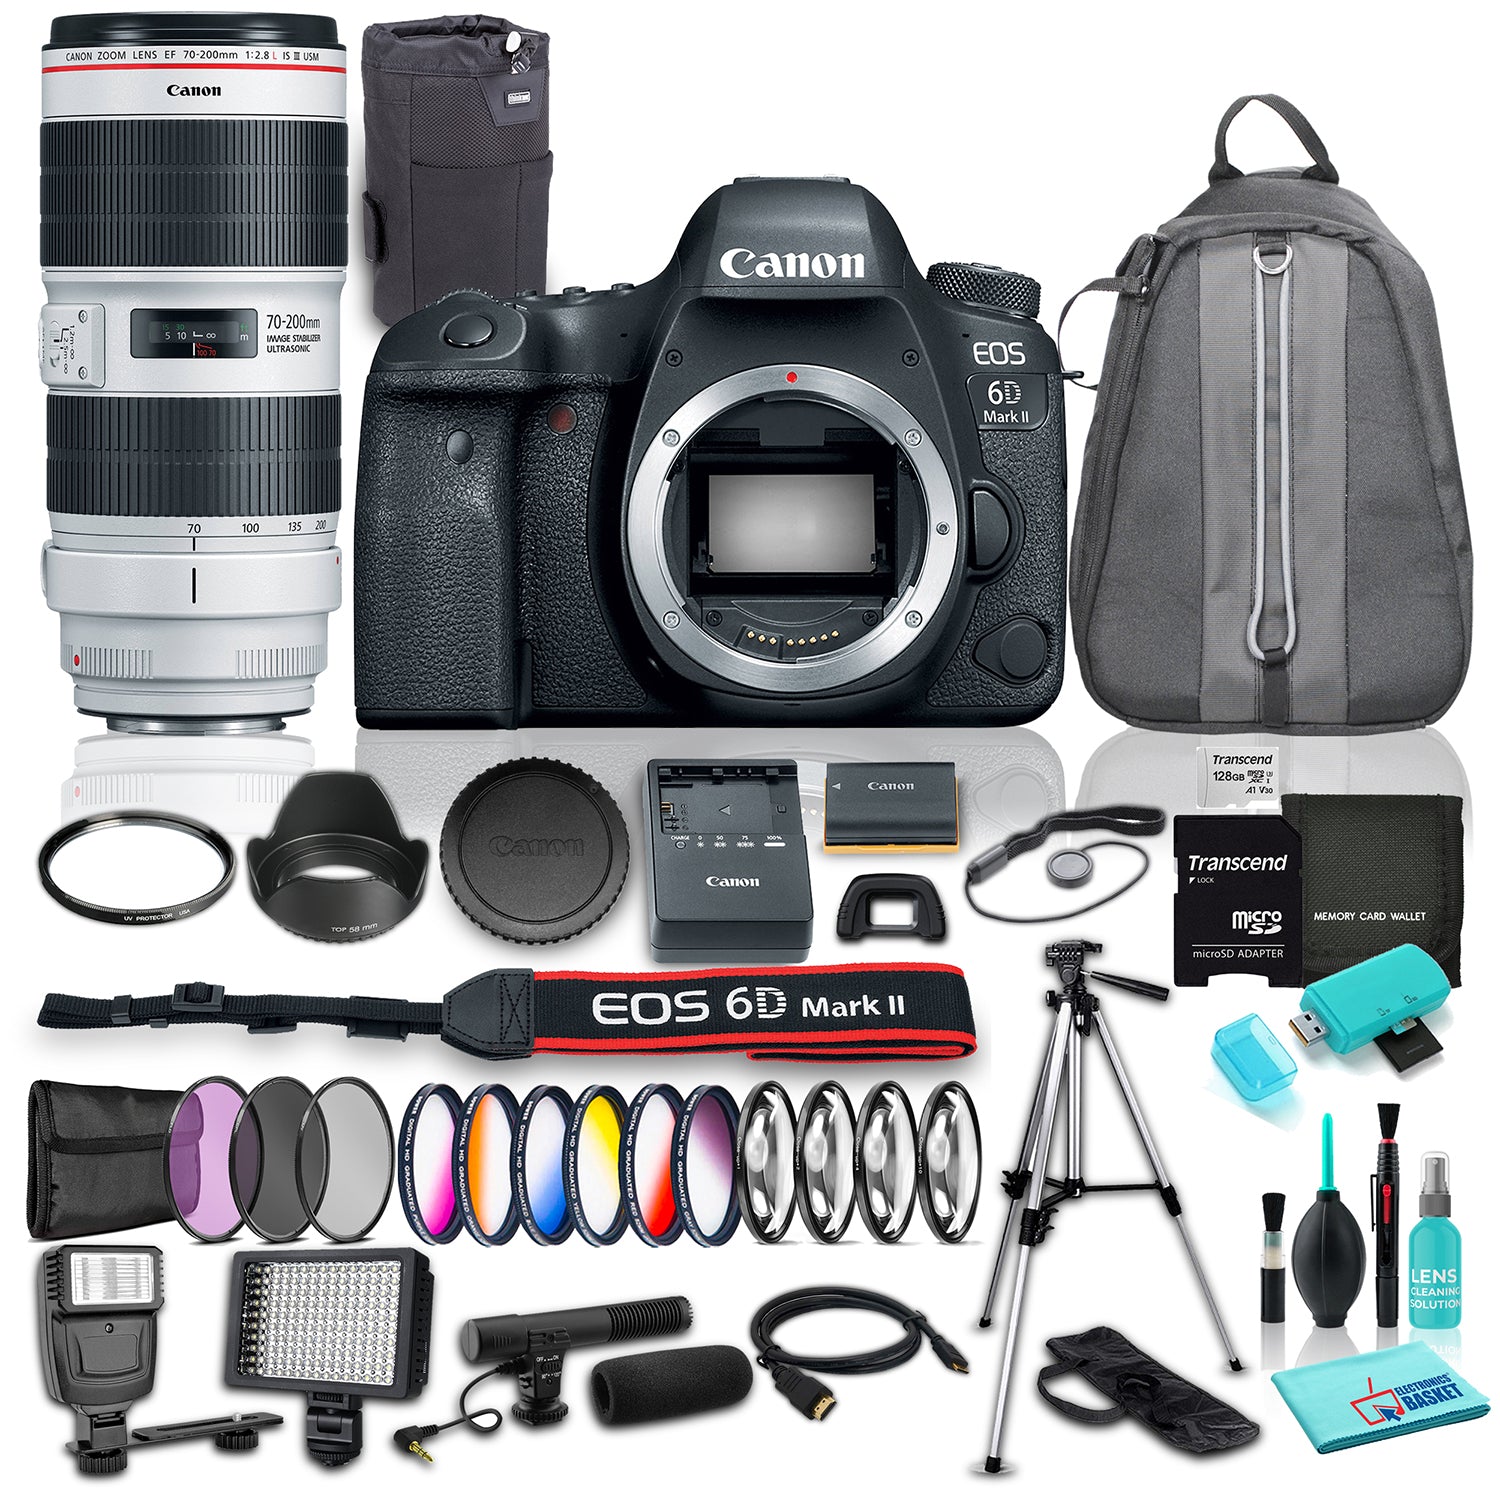 Canon EOS 6D Mark II DSLR Camera (Body Only) w/ Canon EF 70-200mm f/2.8L IS III USM Lens Bundle w/ 17 Piece Accessories